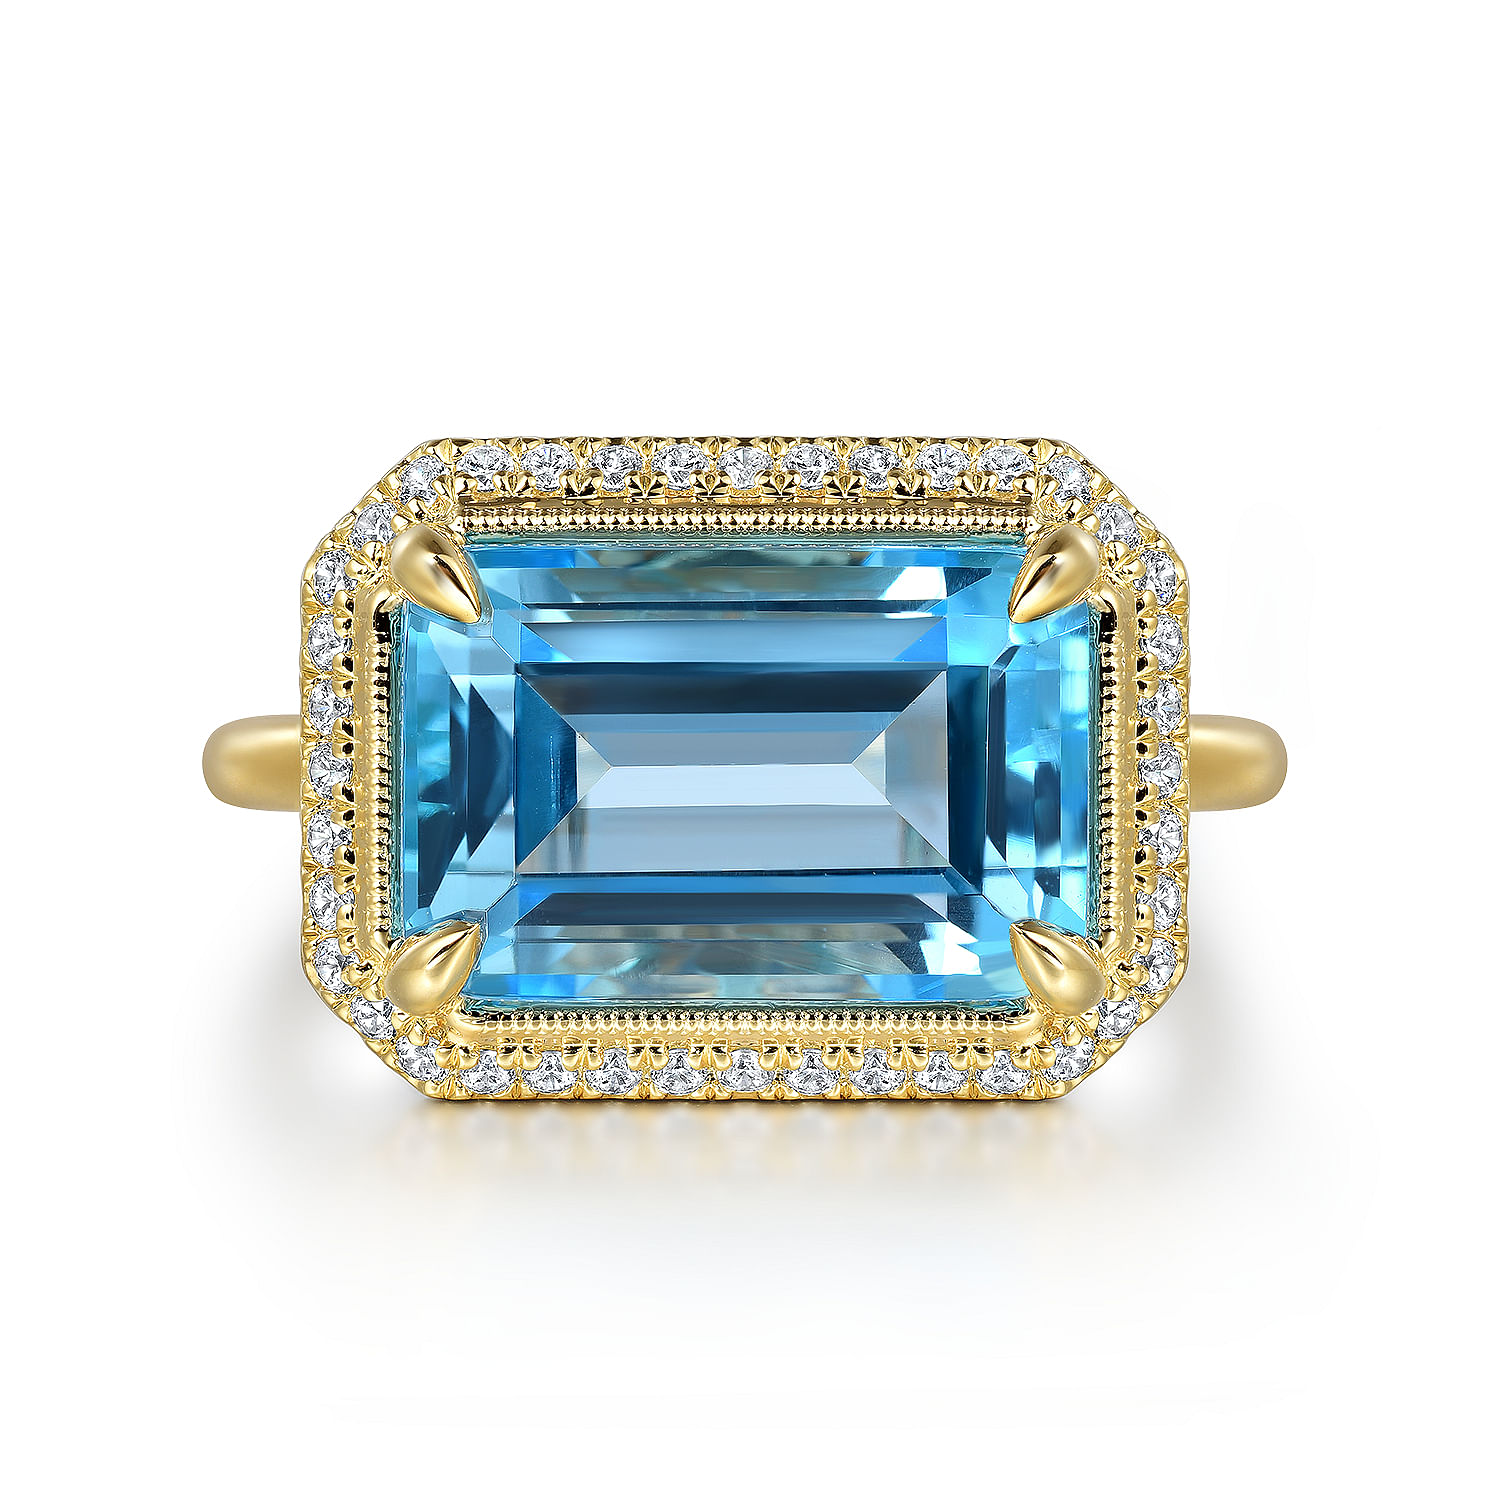 Gabriel - 14K Yellow Gold Diamond and Blue Topaz Emerald Cut Ladies Ring With Flower Pattern Gallery